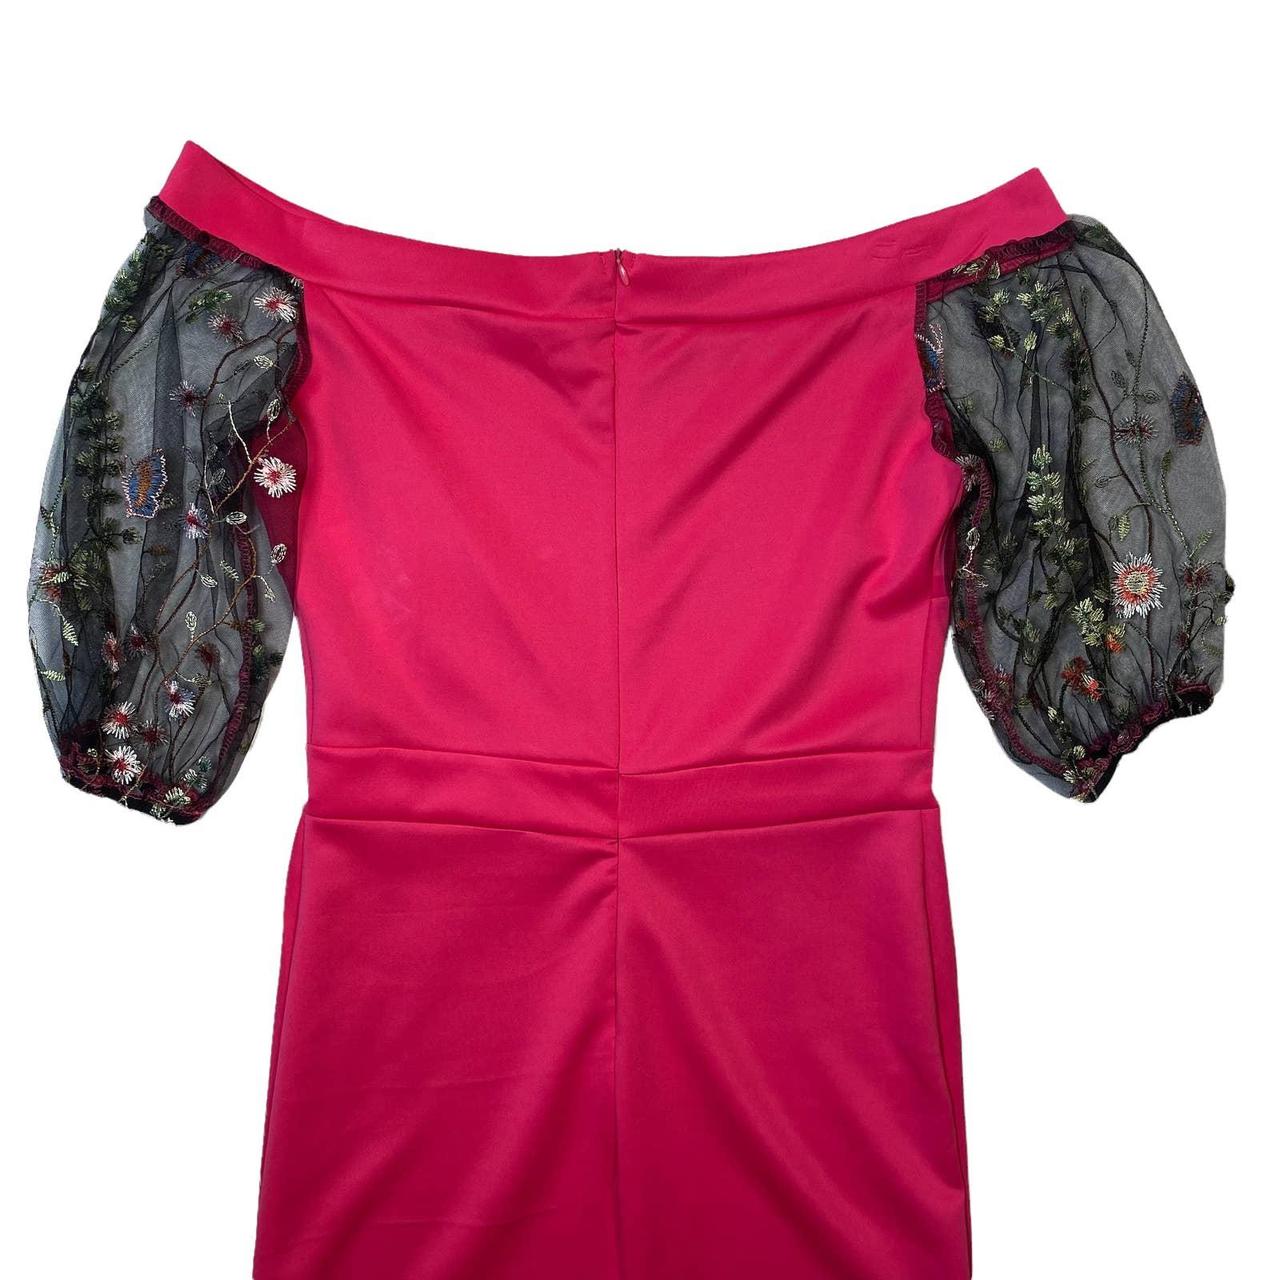 Product Image 3 - Pink Scuba Style Dress with